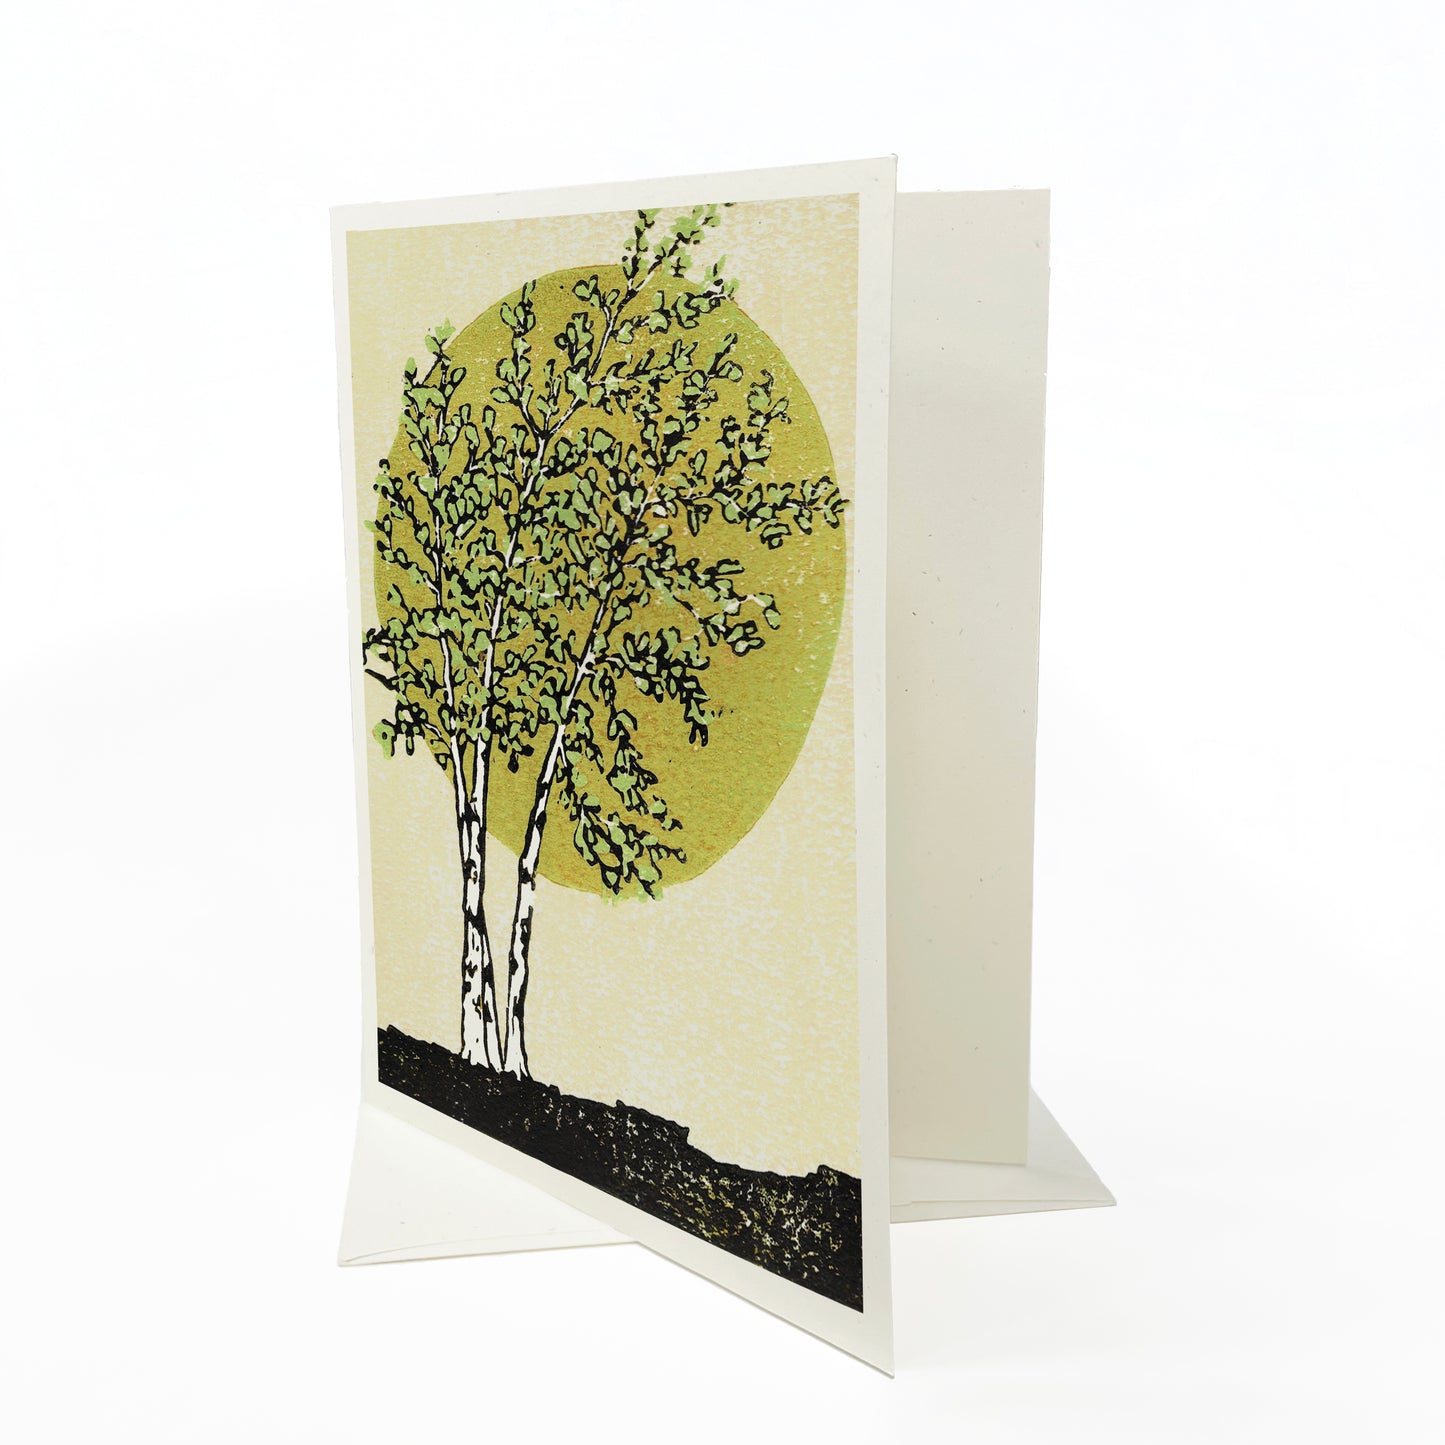 A casually elegant card featuring birch tree art by Natalia Wohletz titled Radiant Birches.